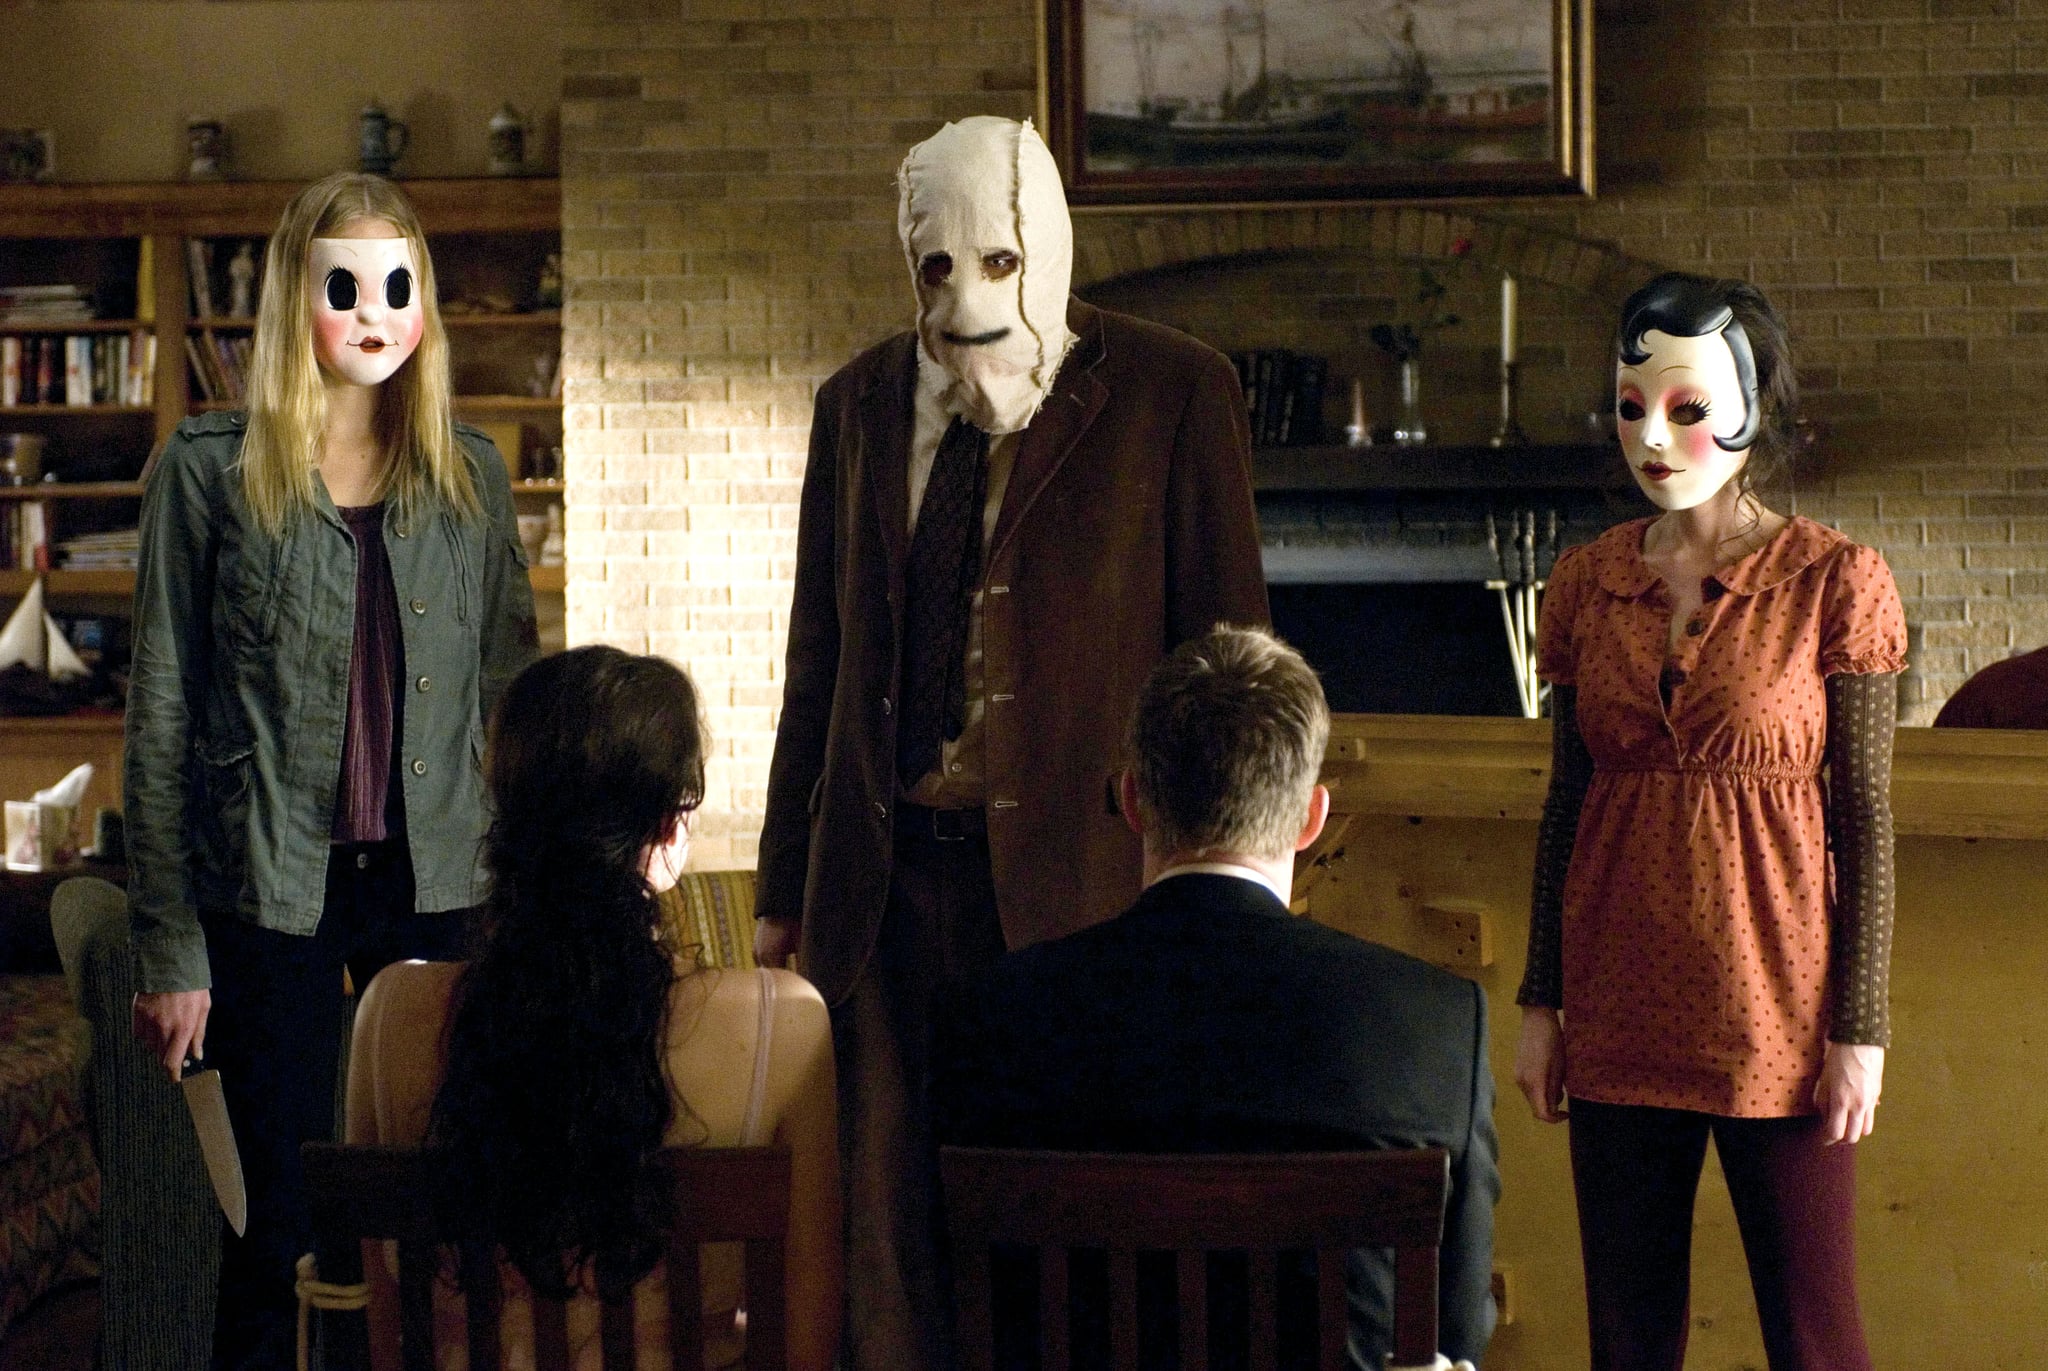 31 Days of Fright: The Strangers